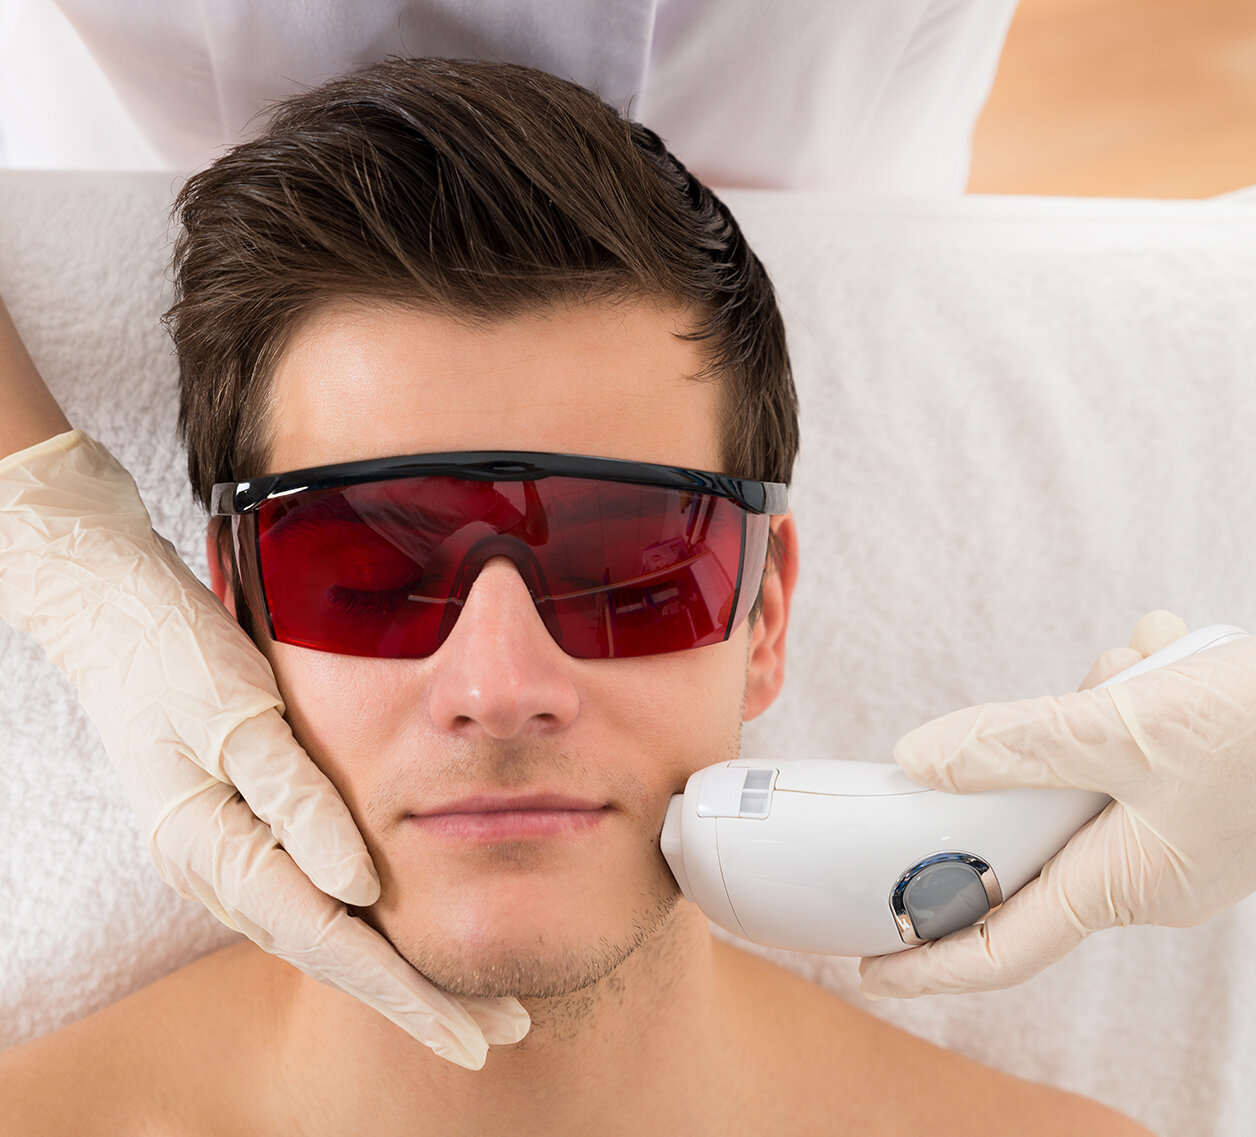 How Much is Tattoo Removal? Learn About the Cost of Laser Tattoo Removal |  British Institute of Lasers